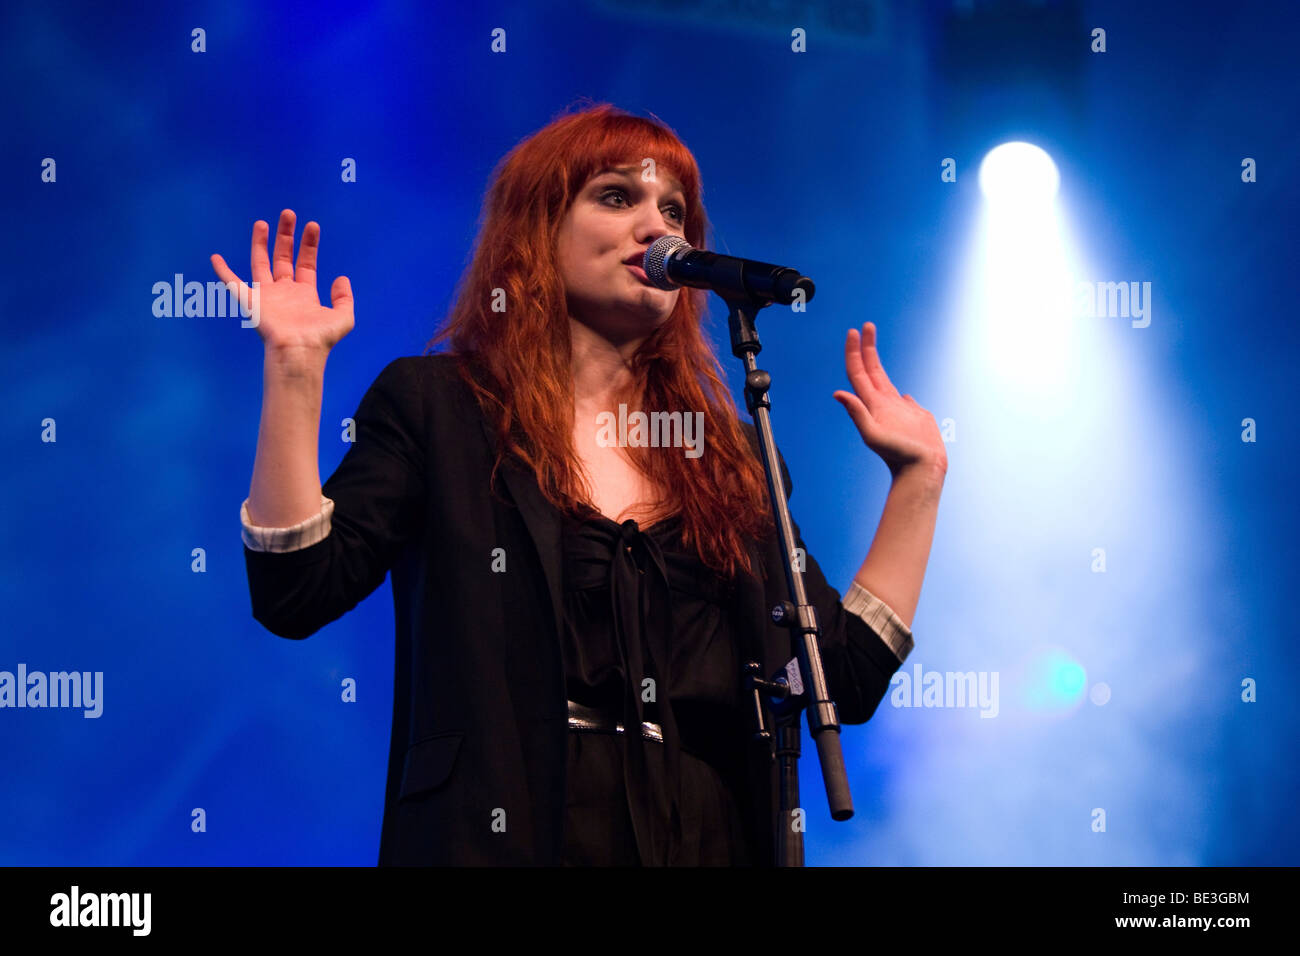 Alison Sudol aka A Fine Frenzy, U.S. singer-songwriter, live at the Blue Balls Festival in the concert hall of the KKL in Lucer Stock Photo